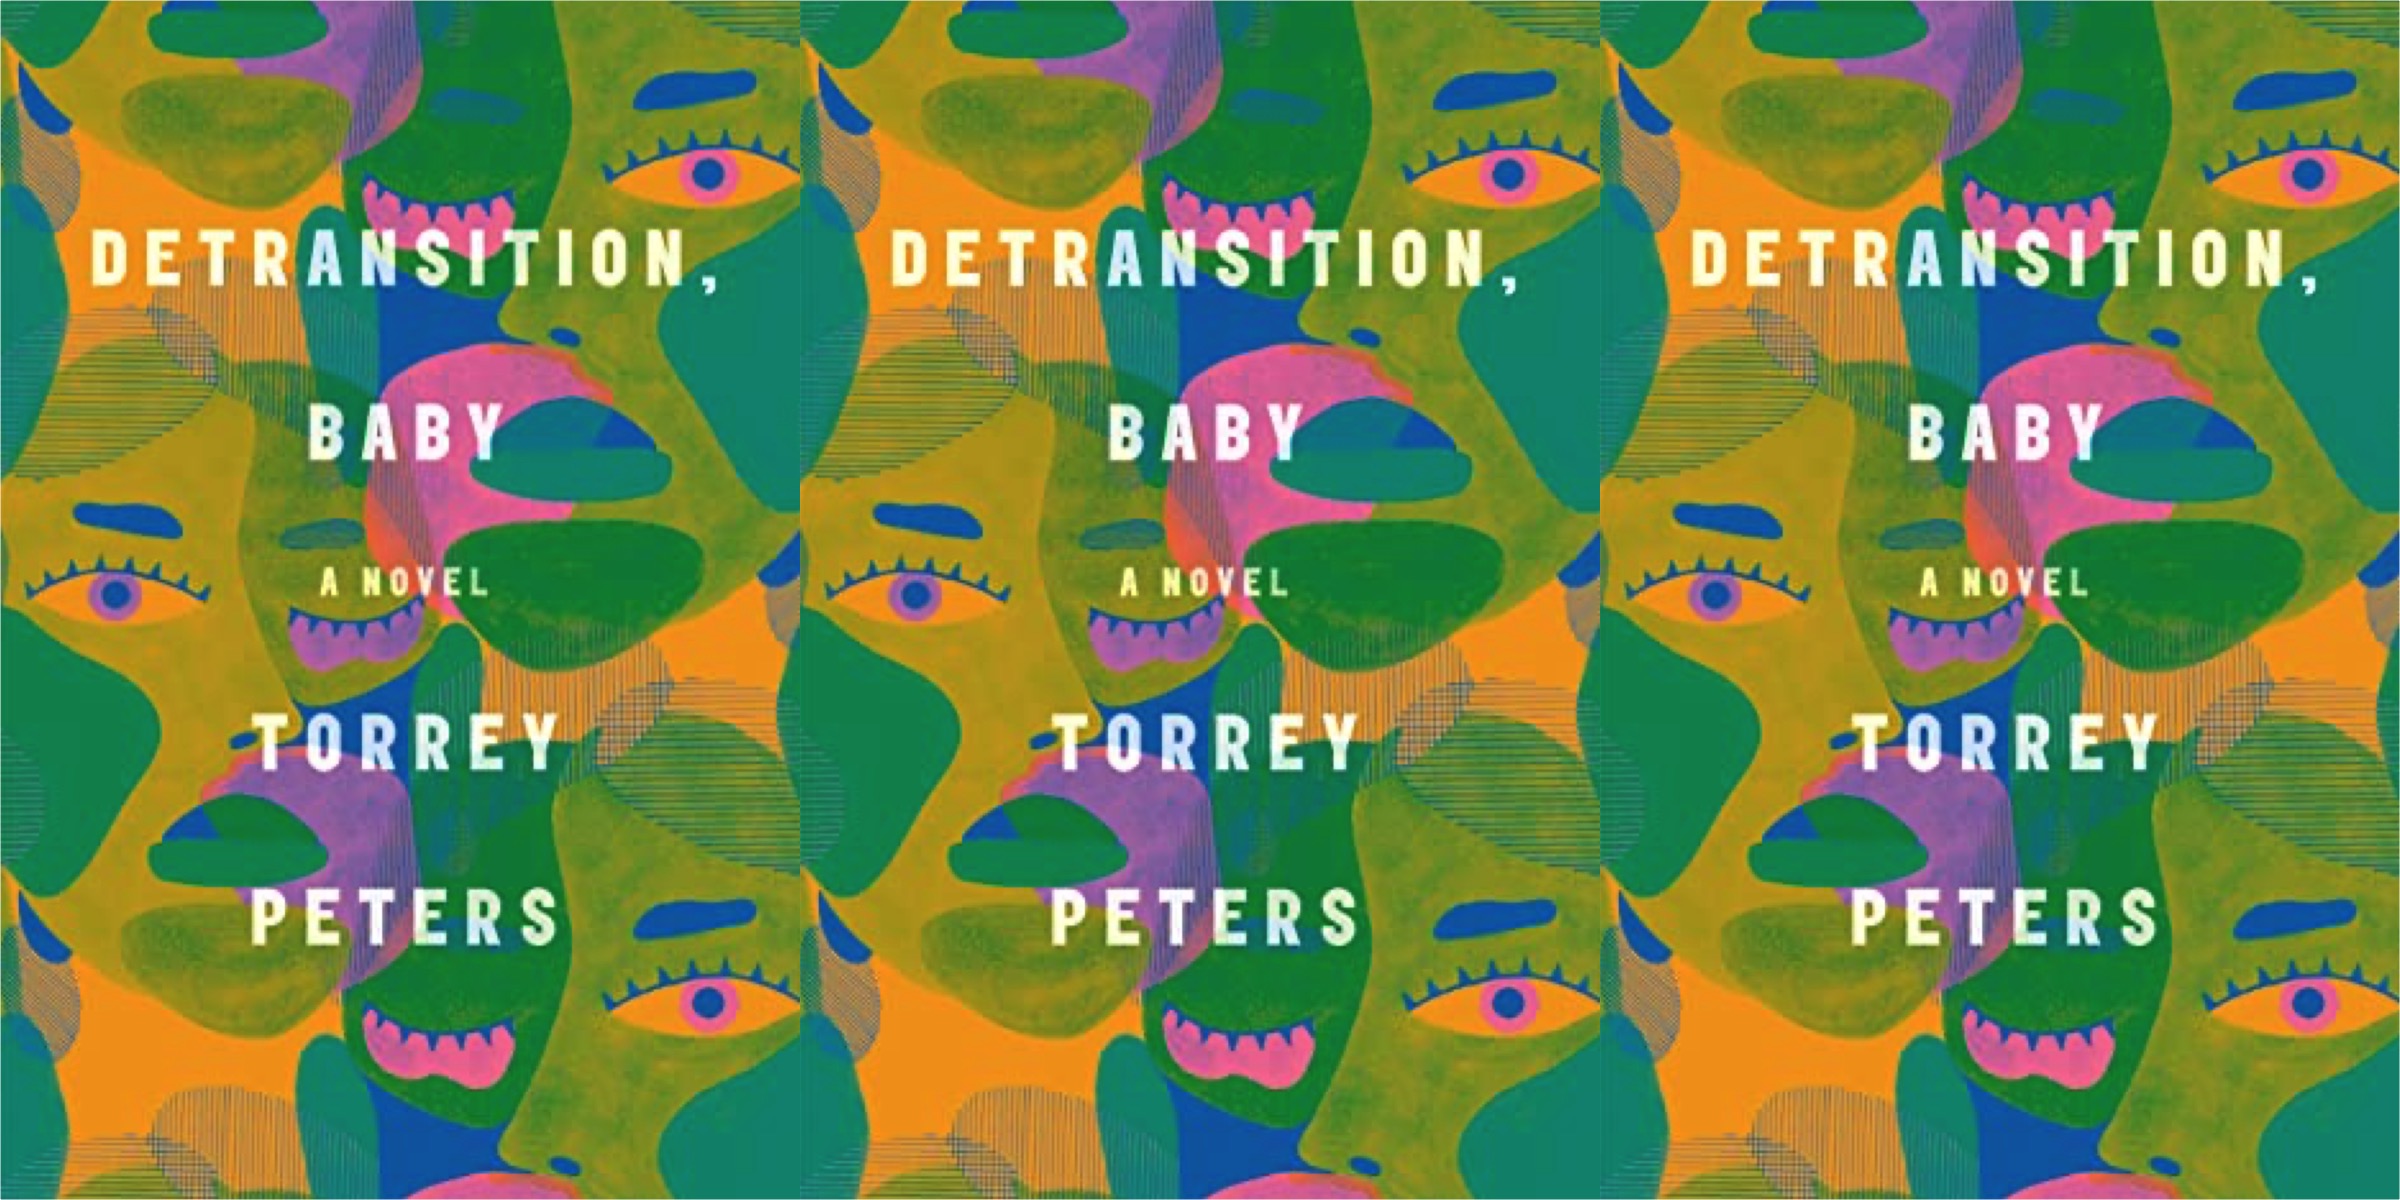 An image repeated three times of the cover of Torrey Peters' Detransition, Baby